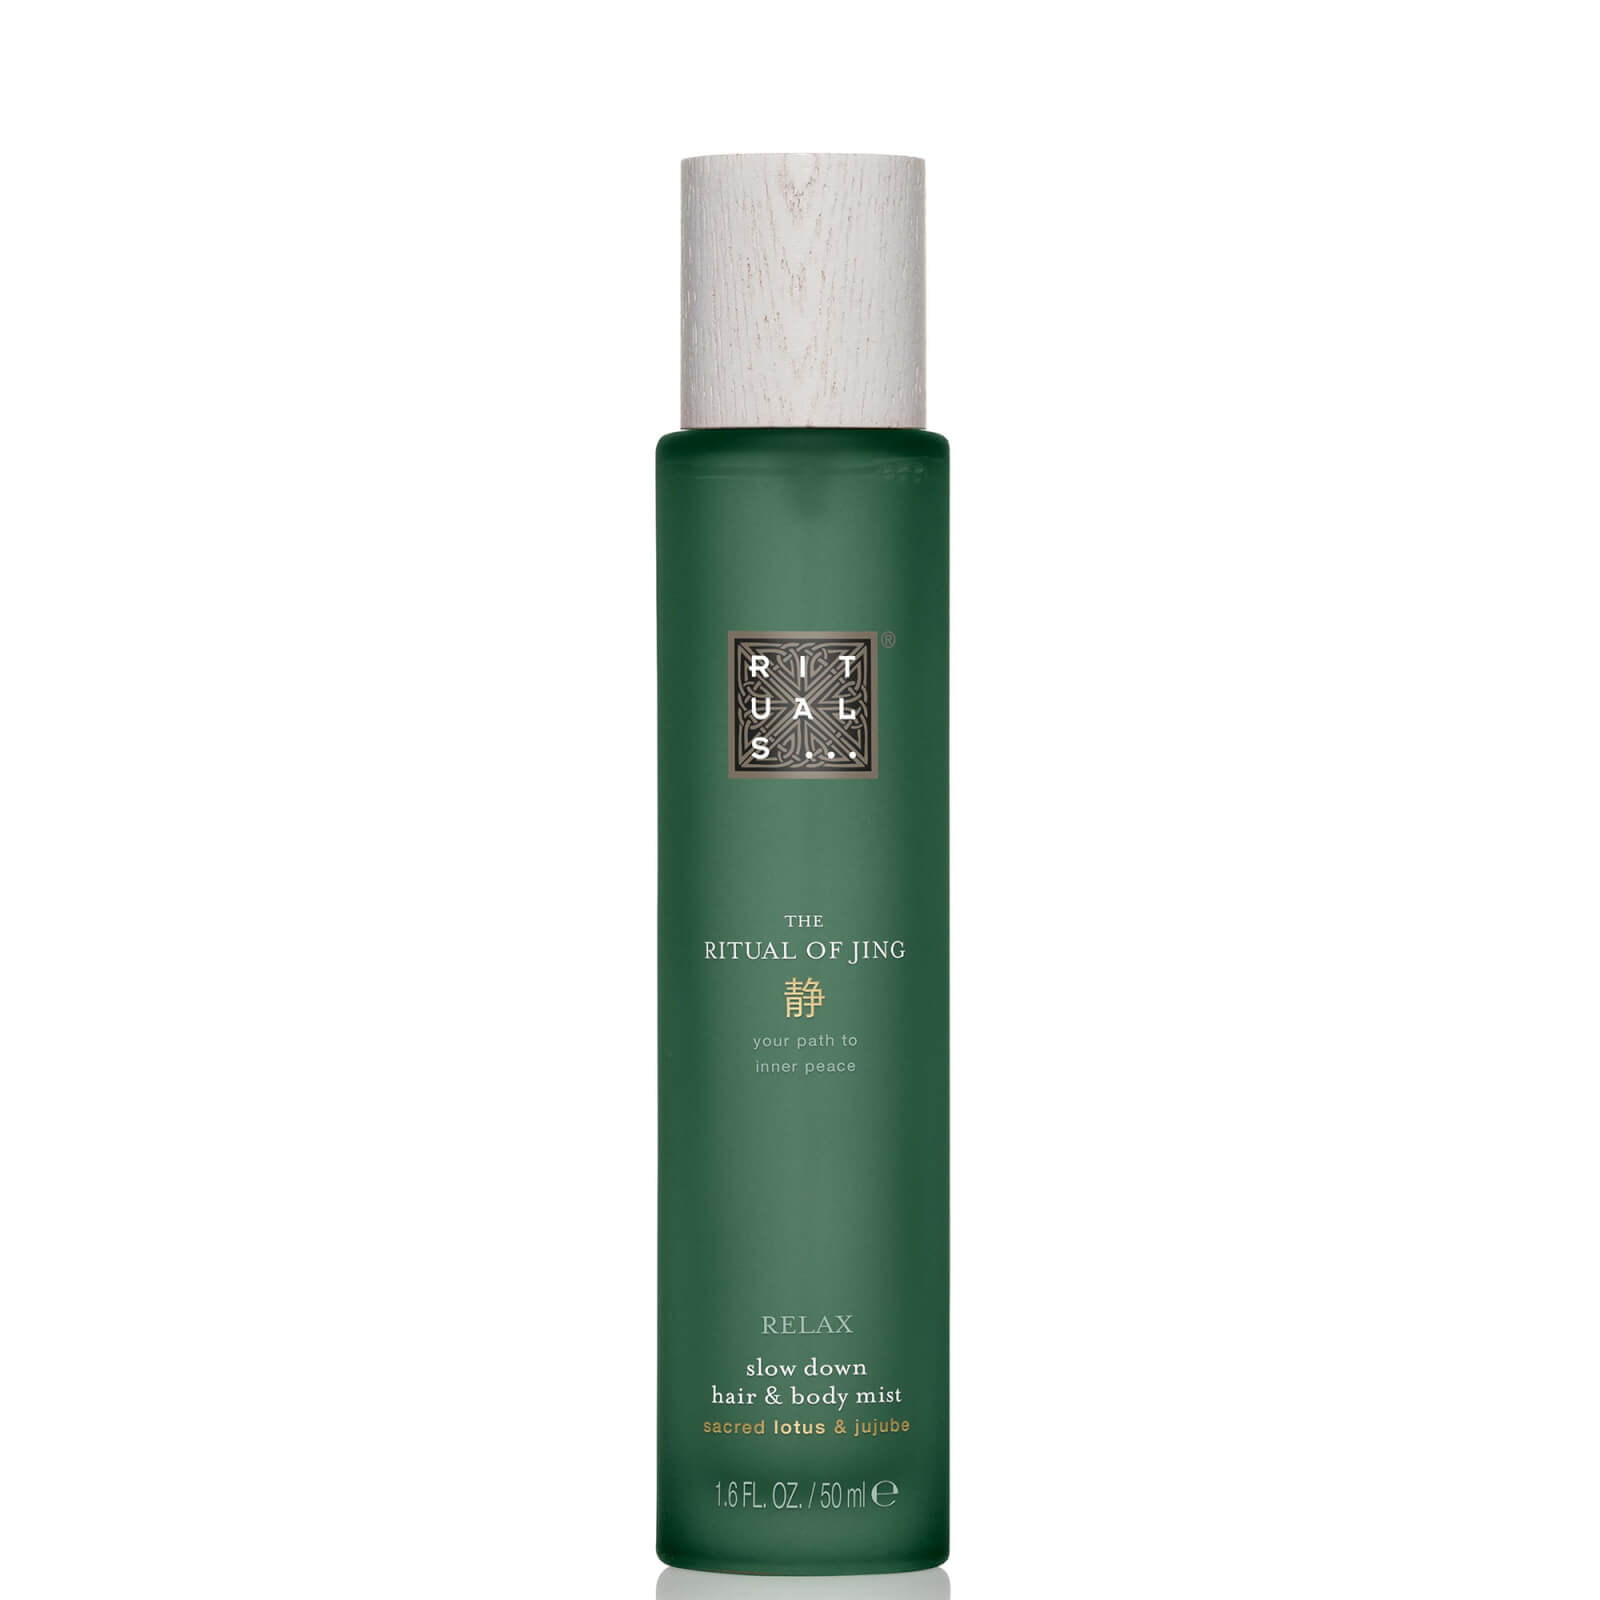 Image of Rituals The Ritual of Jing Hair and Body Mist 50ml